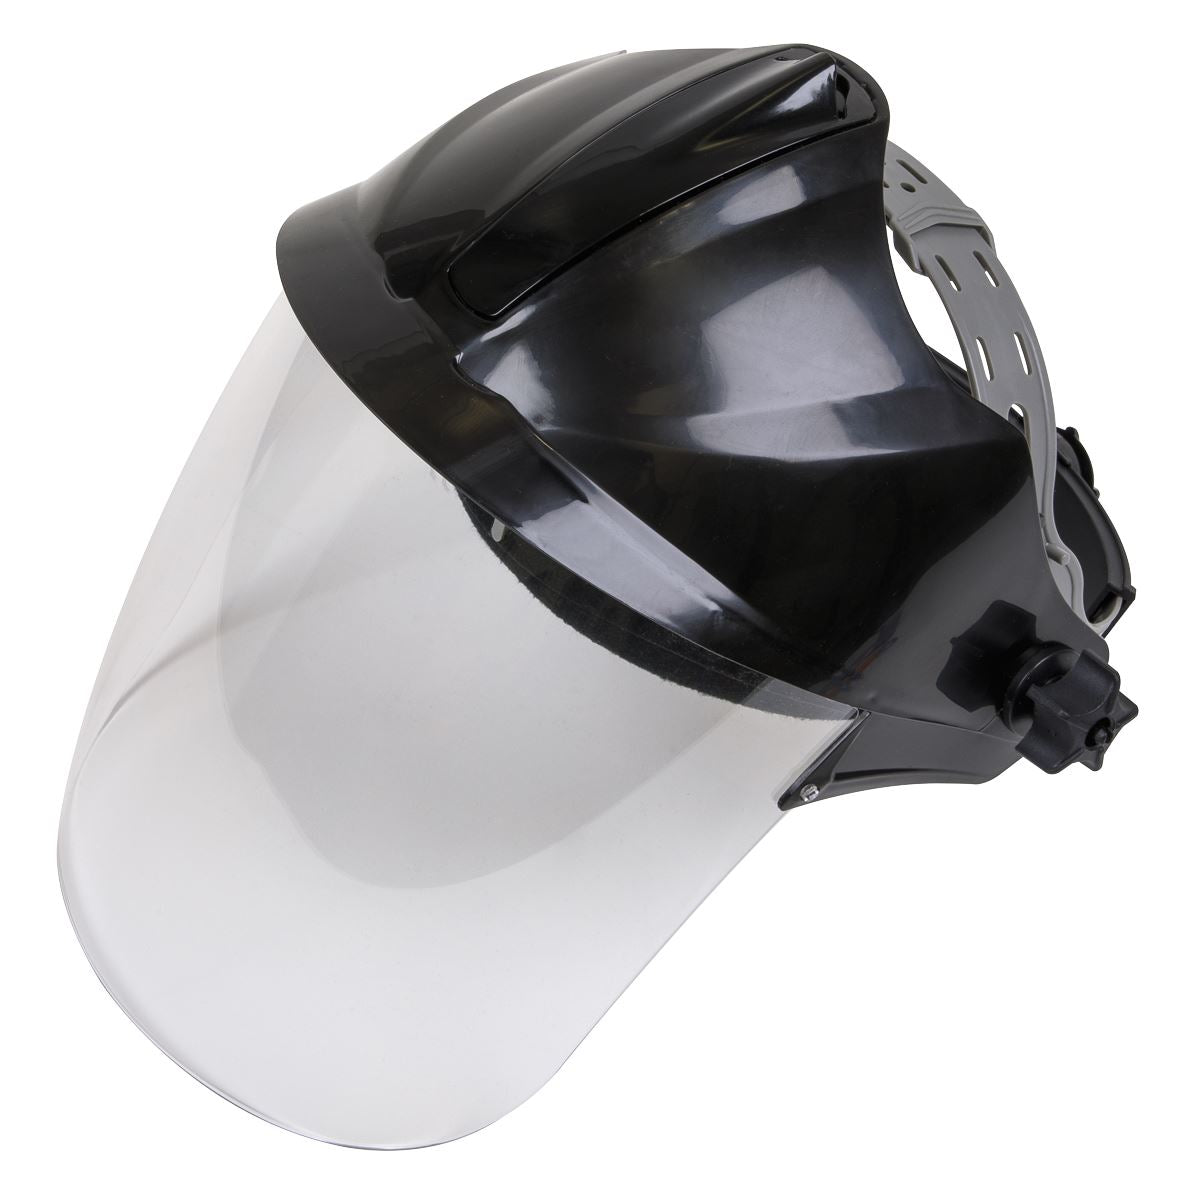 Worksafe by Sealey Deluxe Brow Guard with Aspherical Polycarbonate Full Face Shield